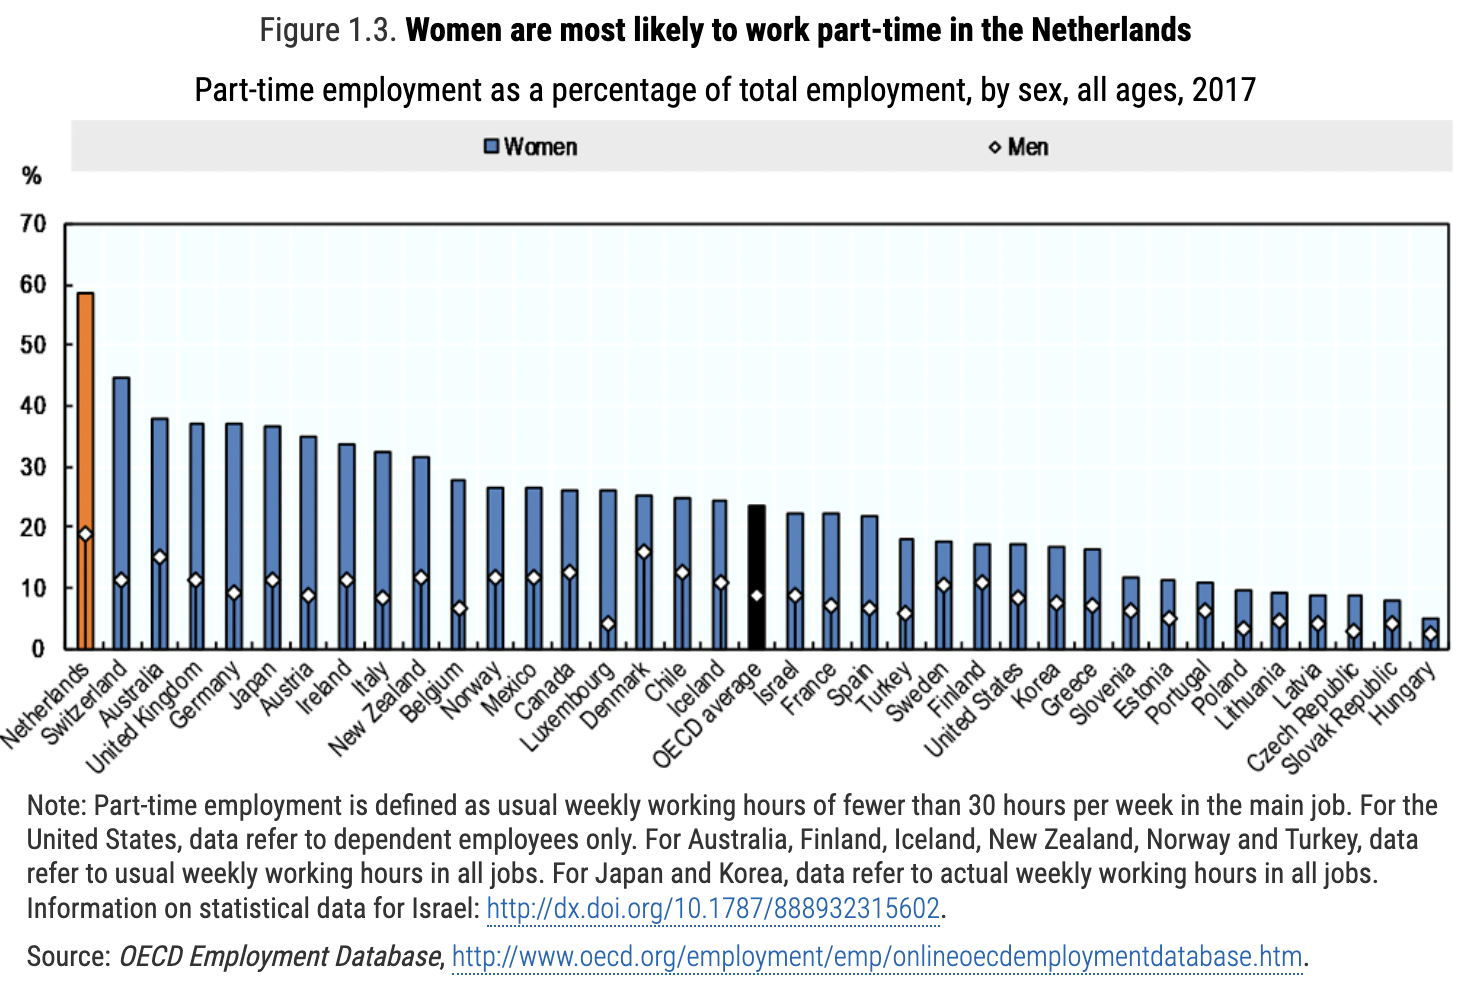 Bar graph by OECD showing how likely women vs men are of taking part-time work